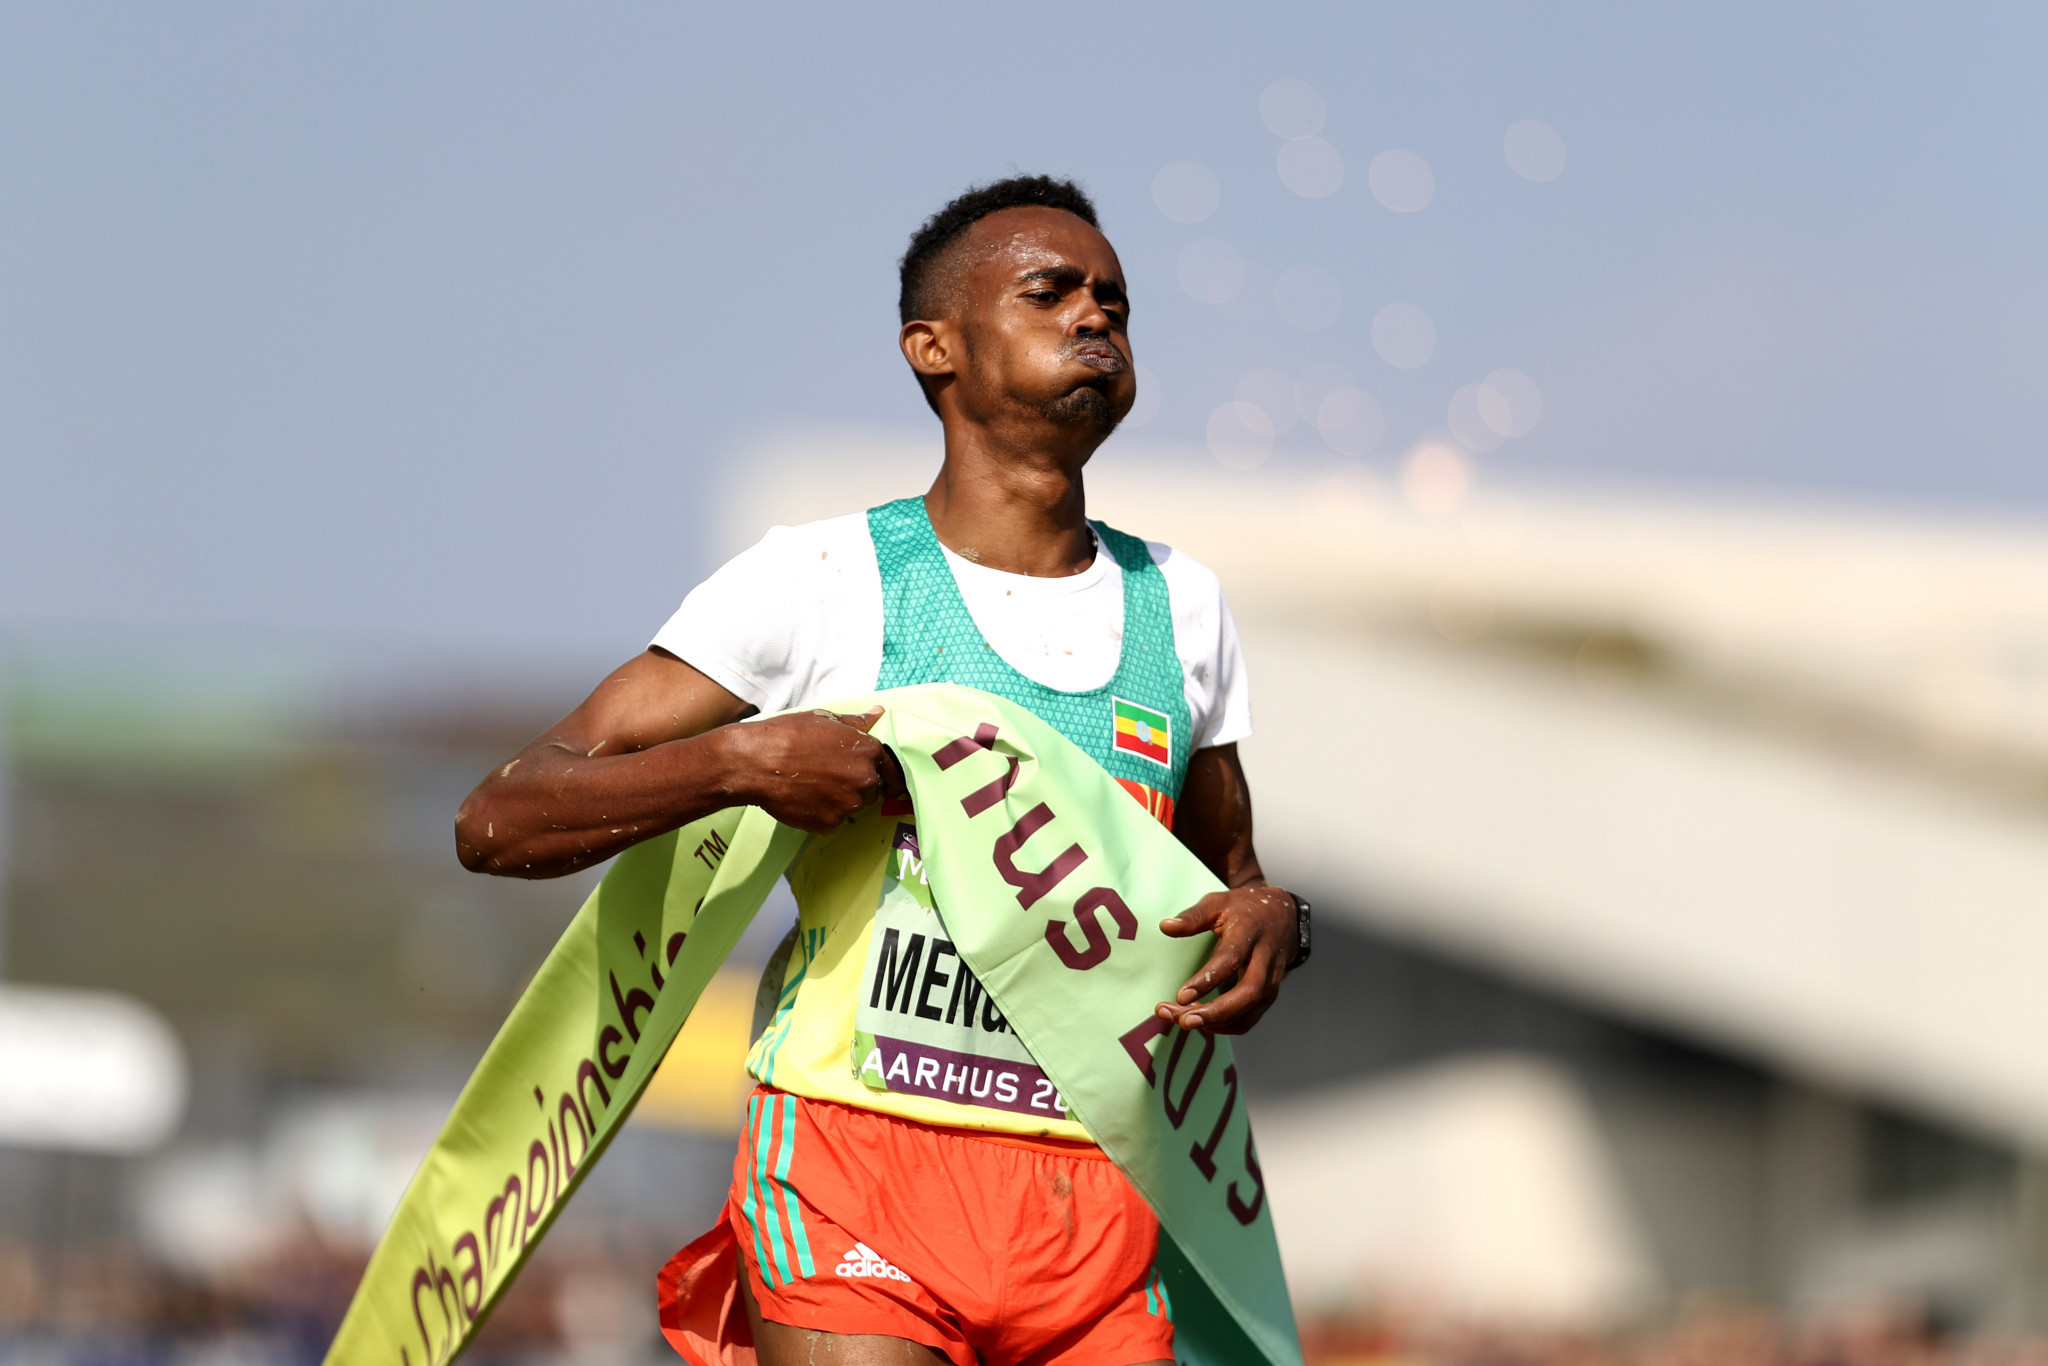 Milkesa Mengesha led an Ethiopian one-two in the men's under-20 race ©Getty Images